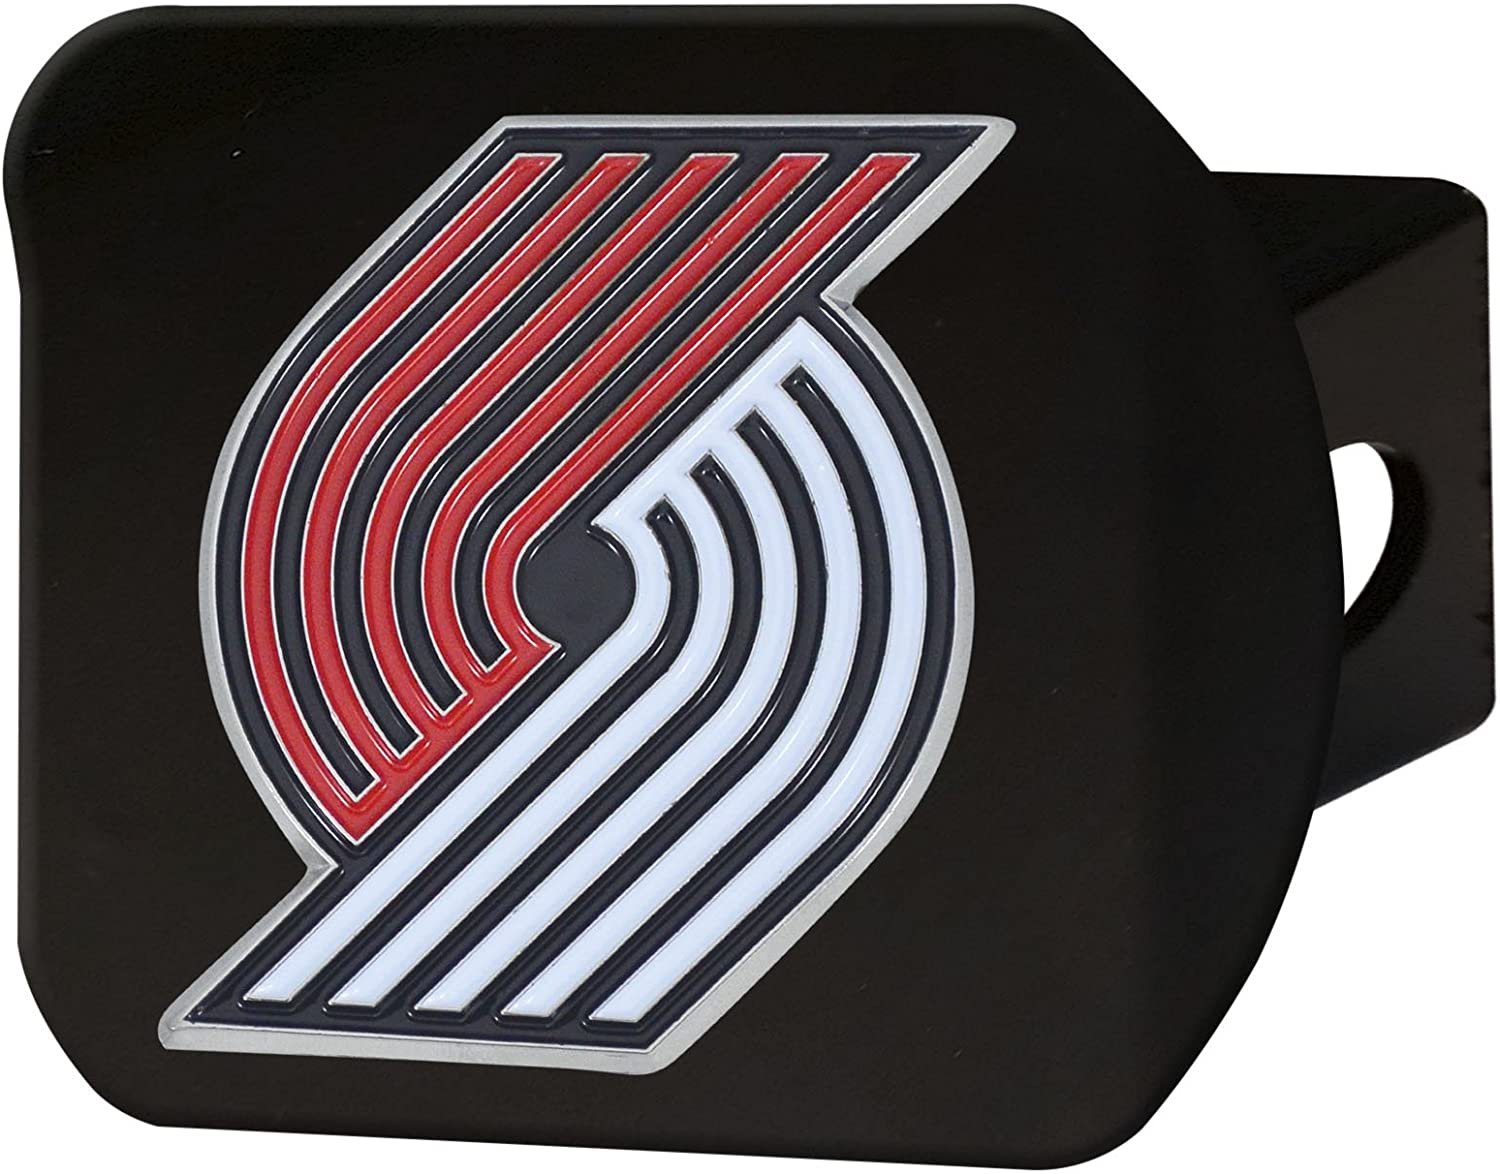 Portland Trail Blazers Solid Metal Black Hitch Cover with Color Metal Emblem 2 Inch Square Type III